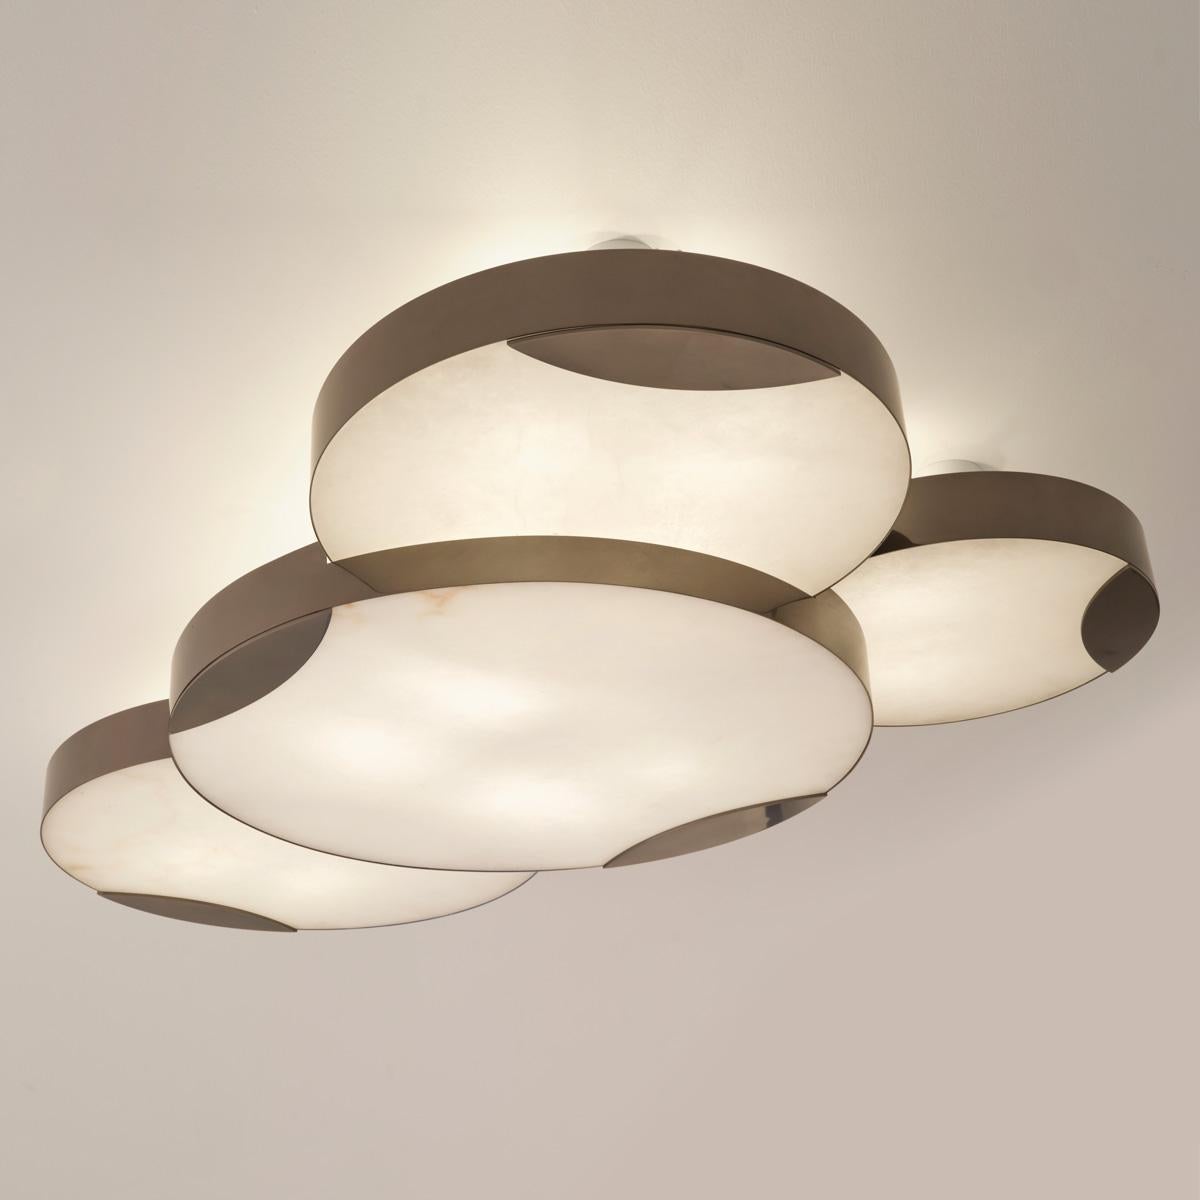 Italian Cloud N.4 Ceiling Light by Gaspare Asaro-Peltro Finish For Sale